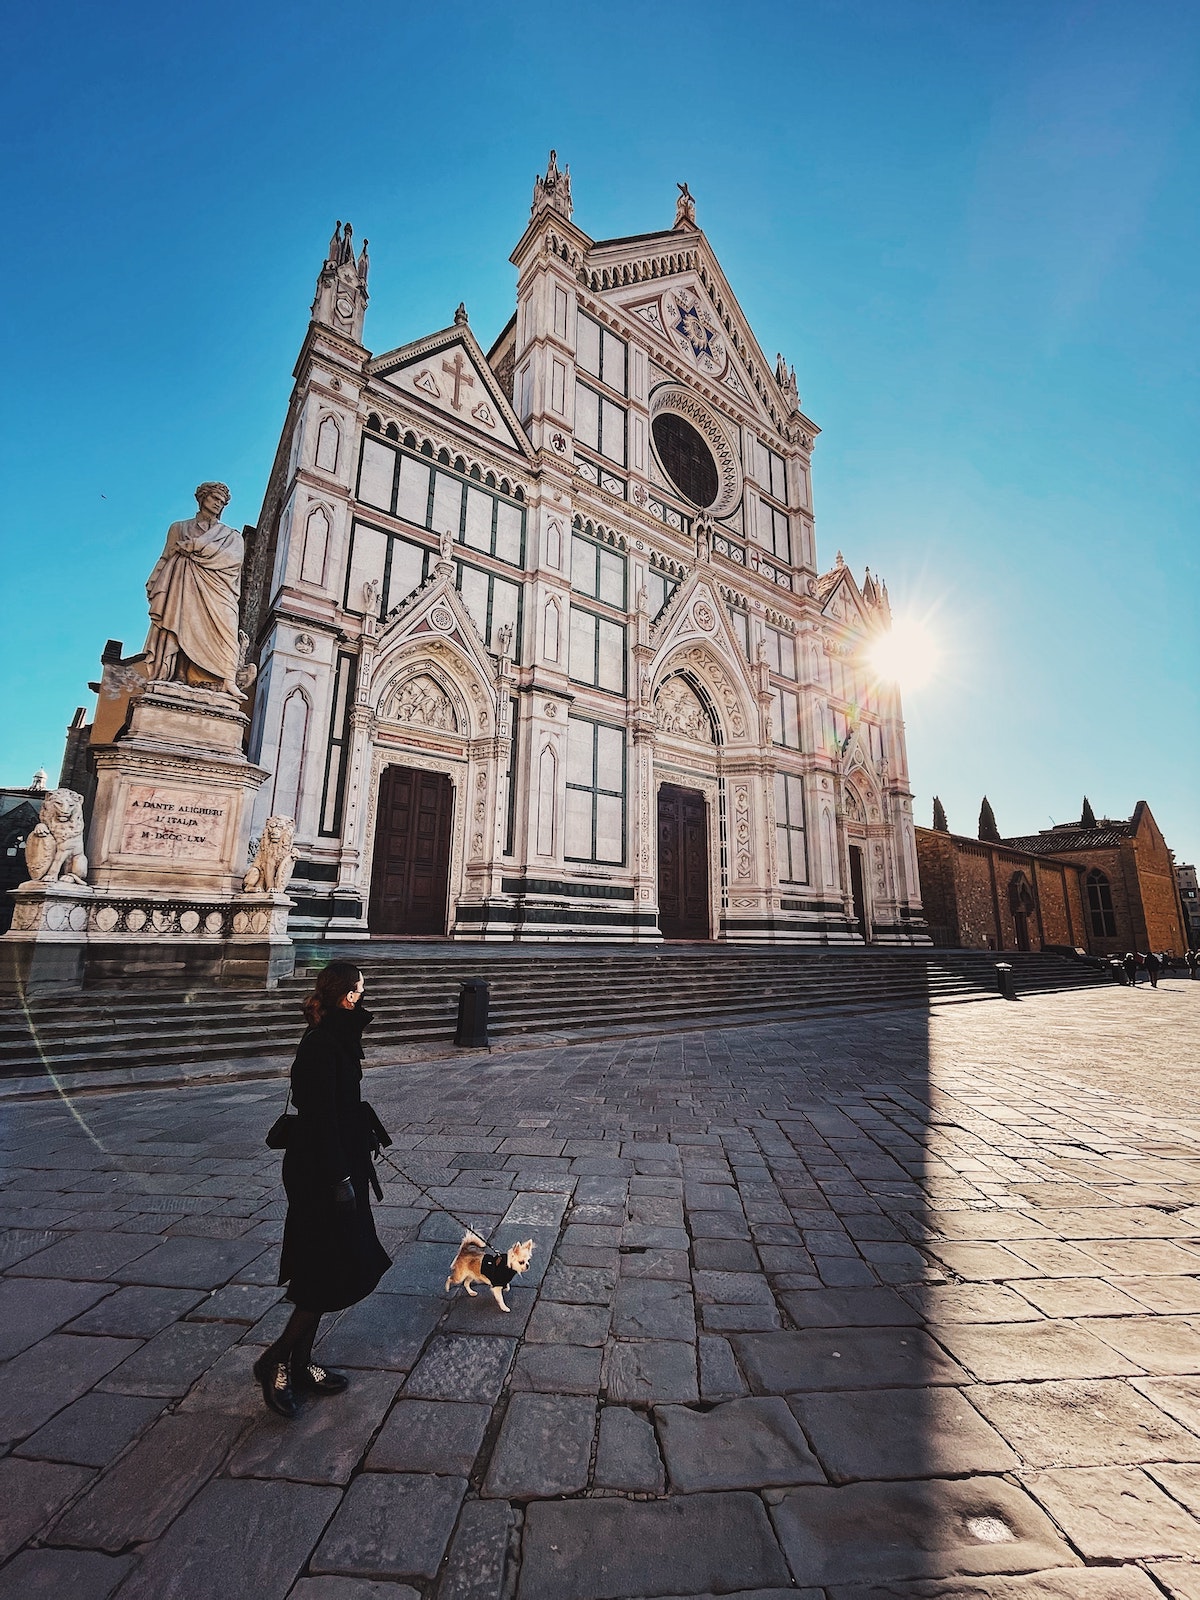 Woman walking her dog in front of a large church in Florence, Italy on a clear day.